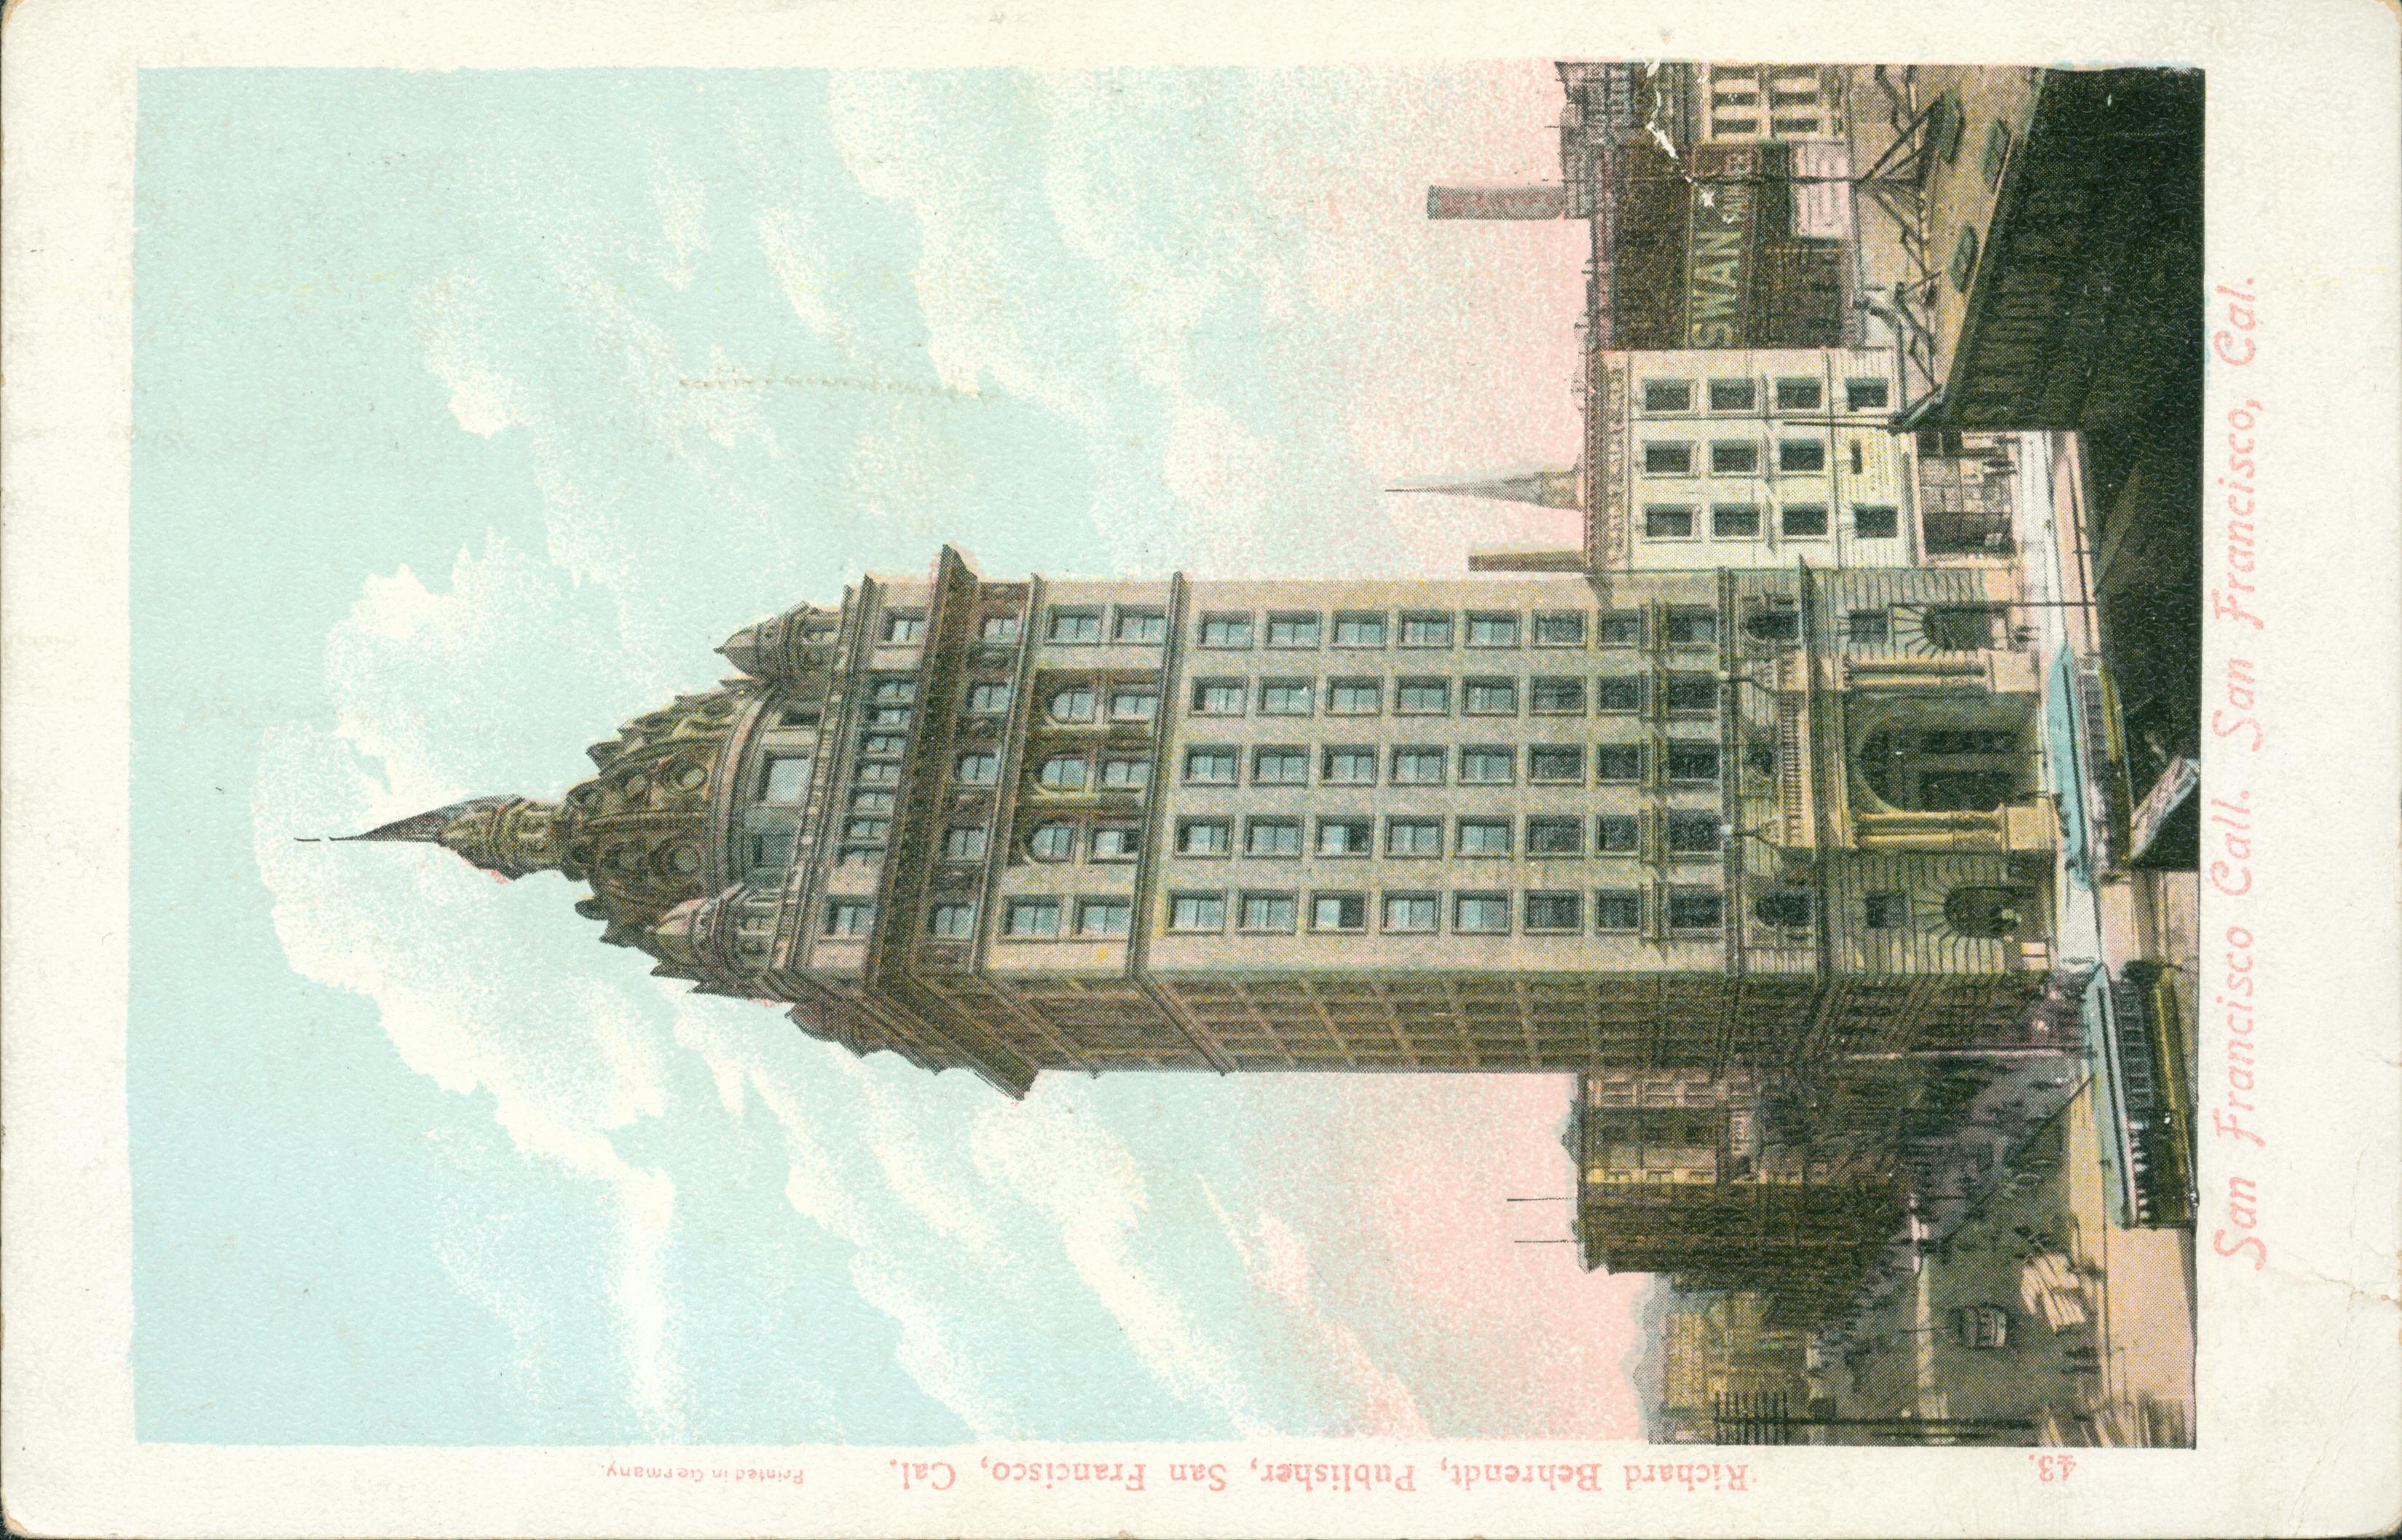 View of San Francisco Call Building, city buildings, trolley cars,